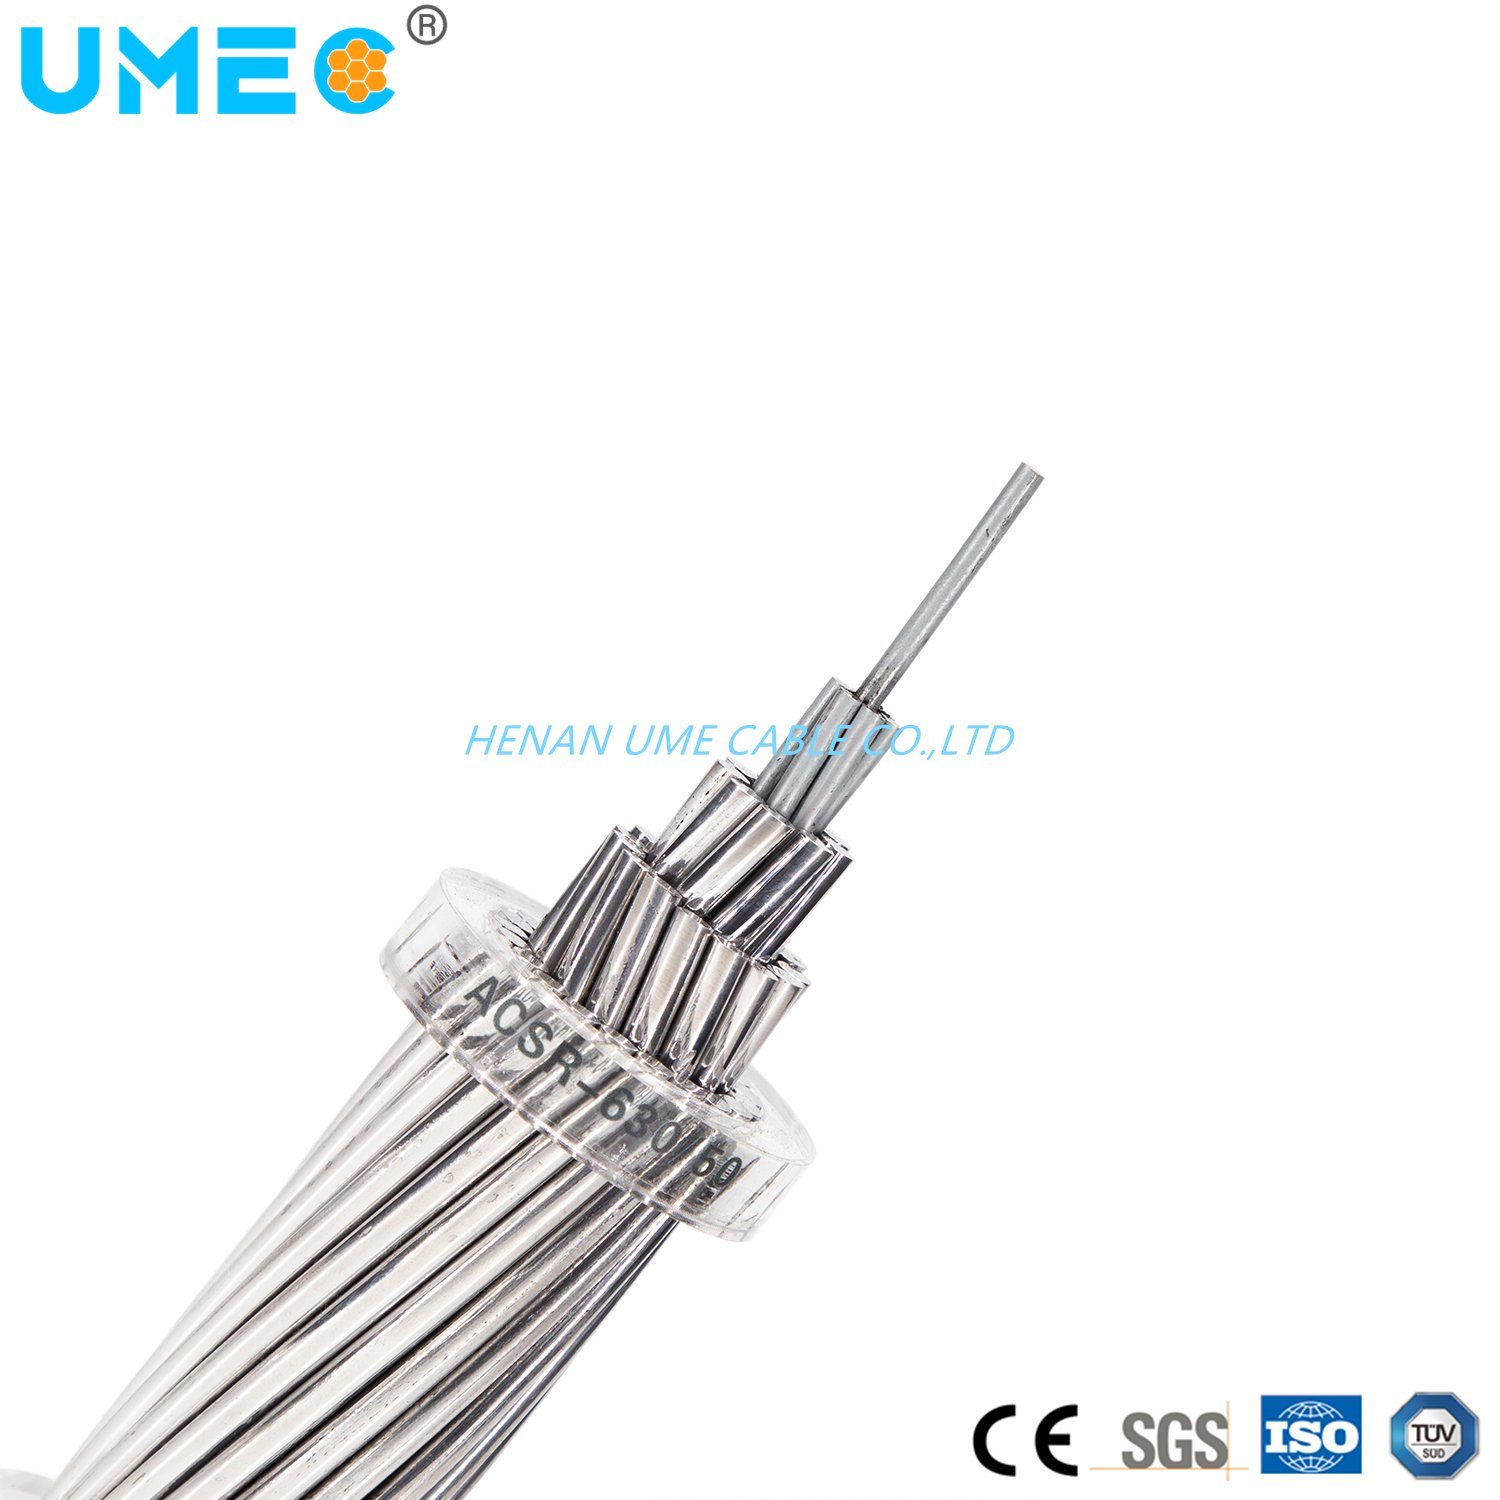 Overhead Transmission Line Aluminum Conductor Steel Reinforced Bare ACSR Conductor